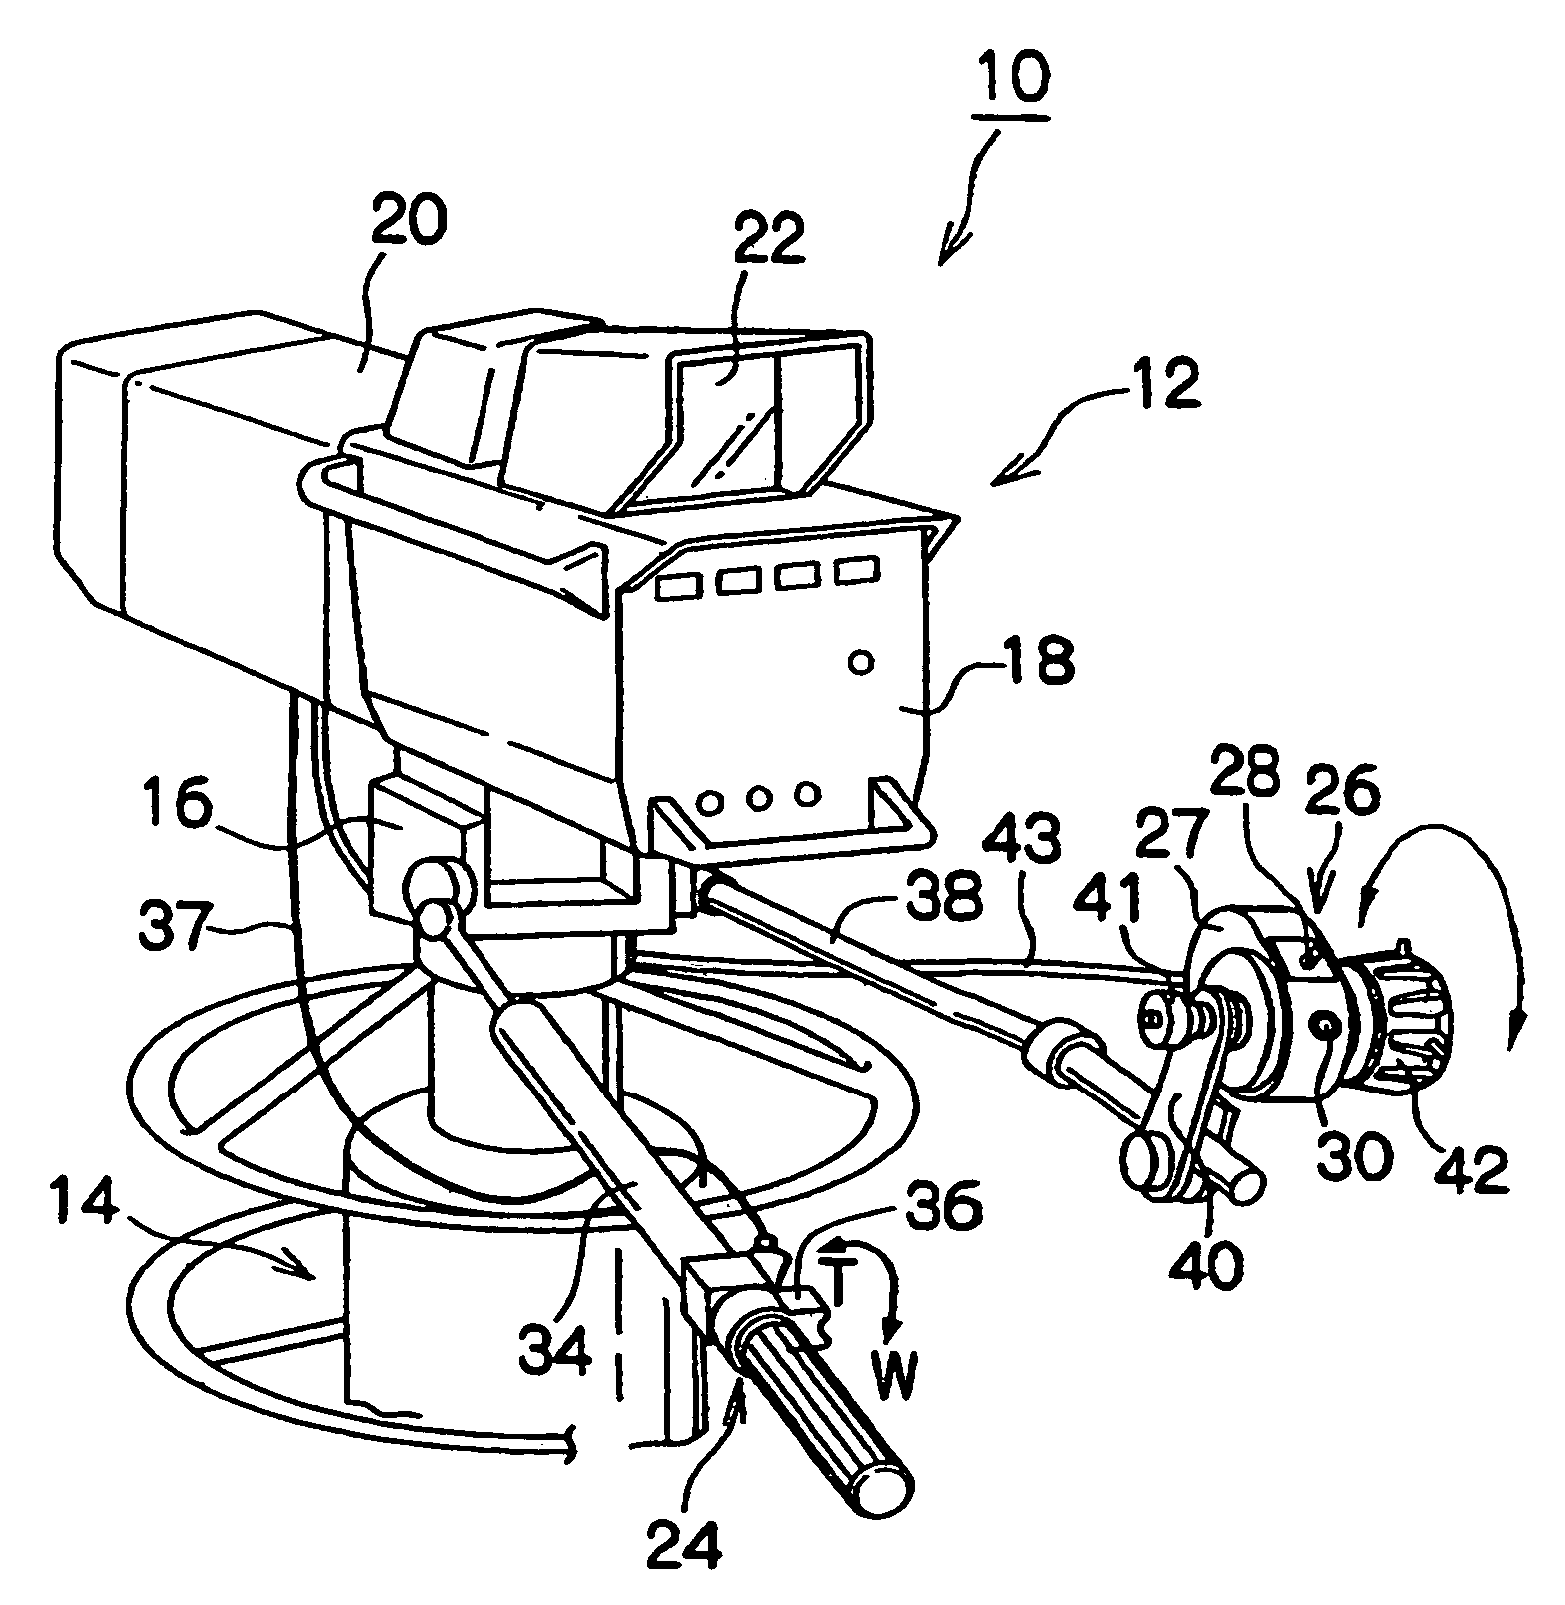 Focus control apparatus for auto-focusing on a subject in an area specified within a range of a camera image picked up by a television camera